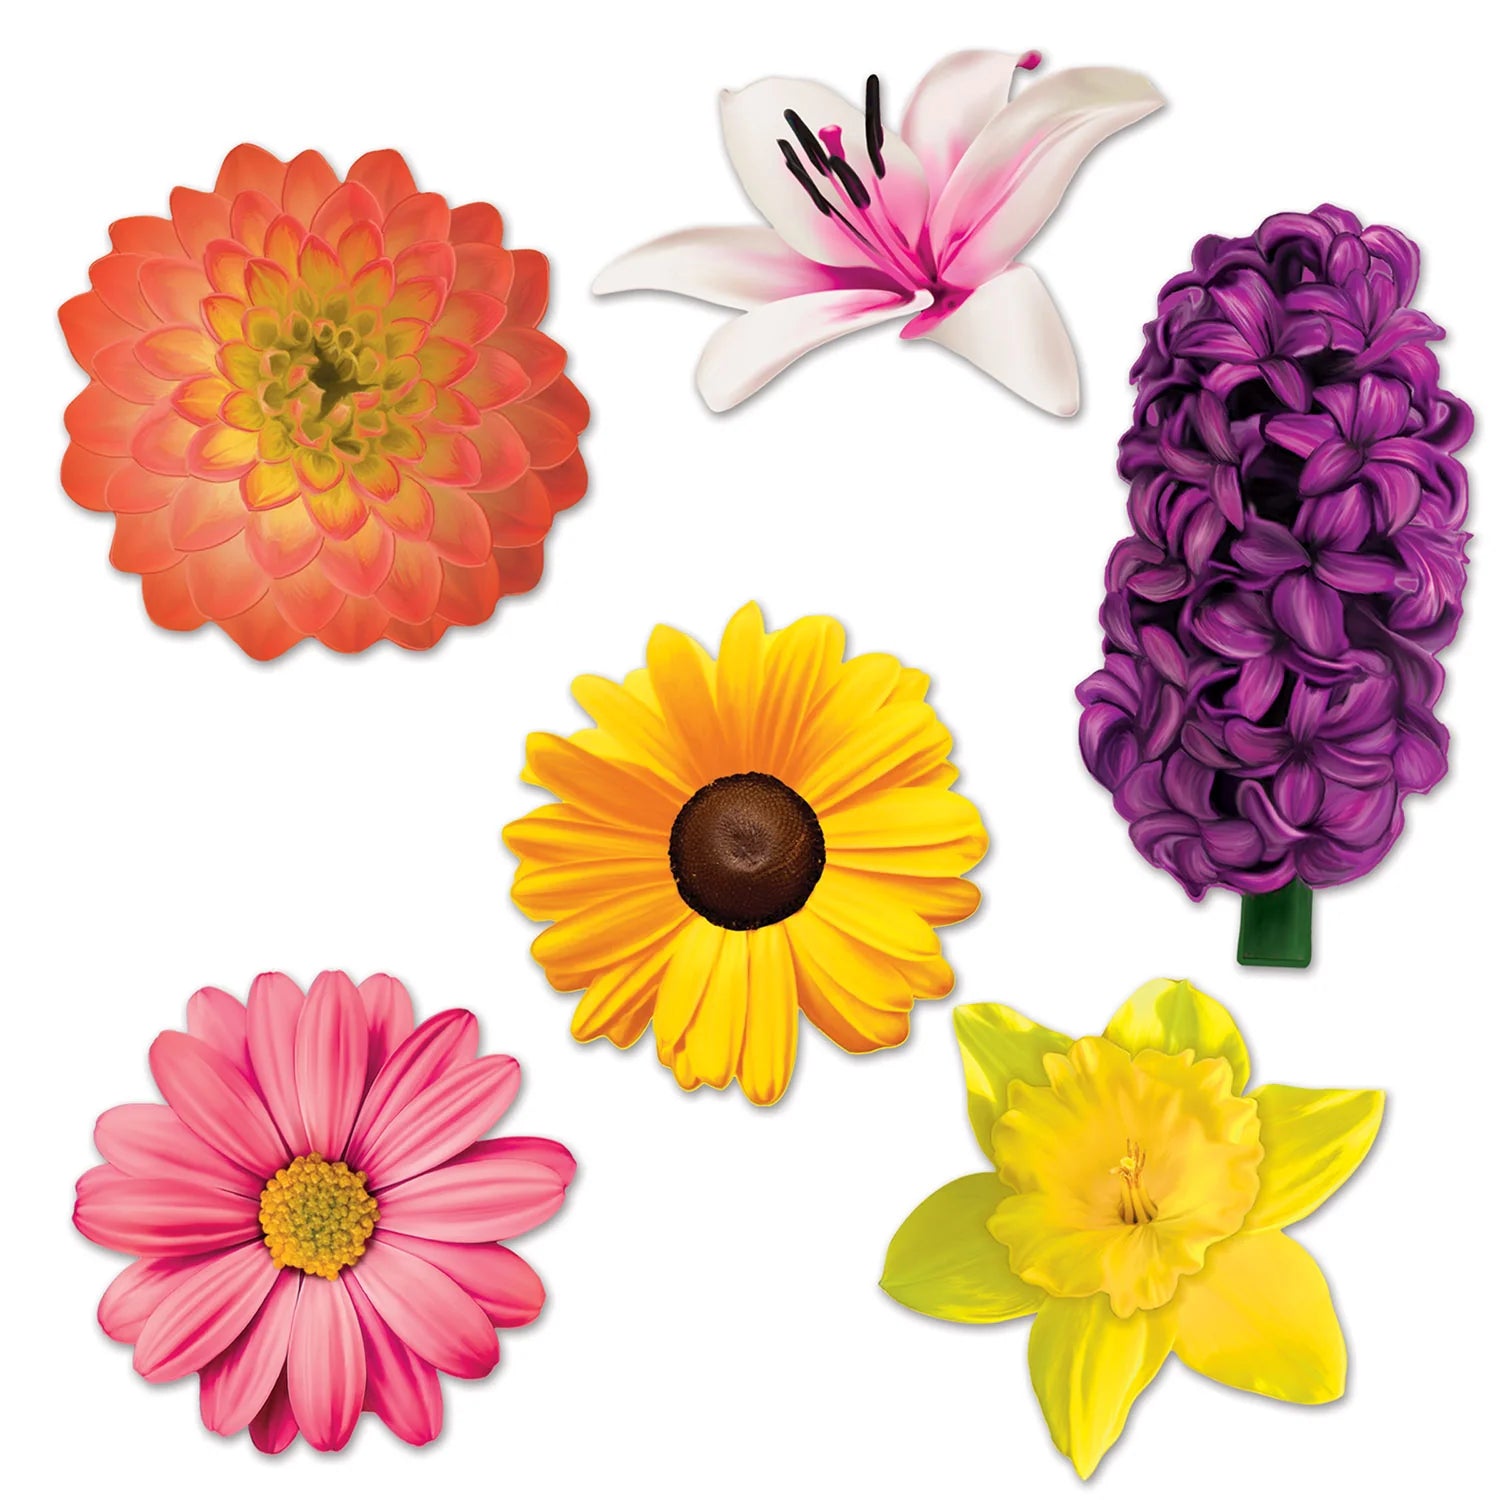 Blooming Fun: How to Throw a Vibrant Spring and Summer Party with BulkPartySupplies.com!